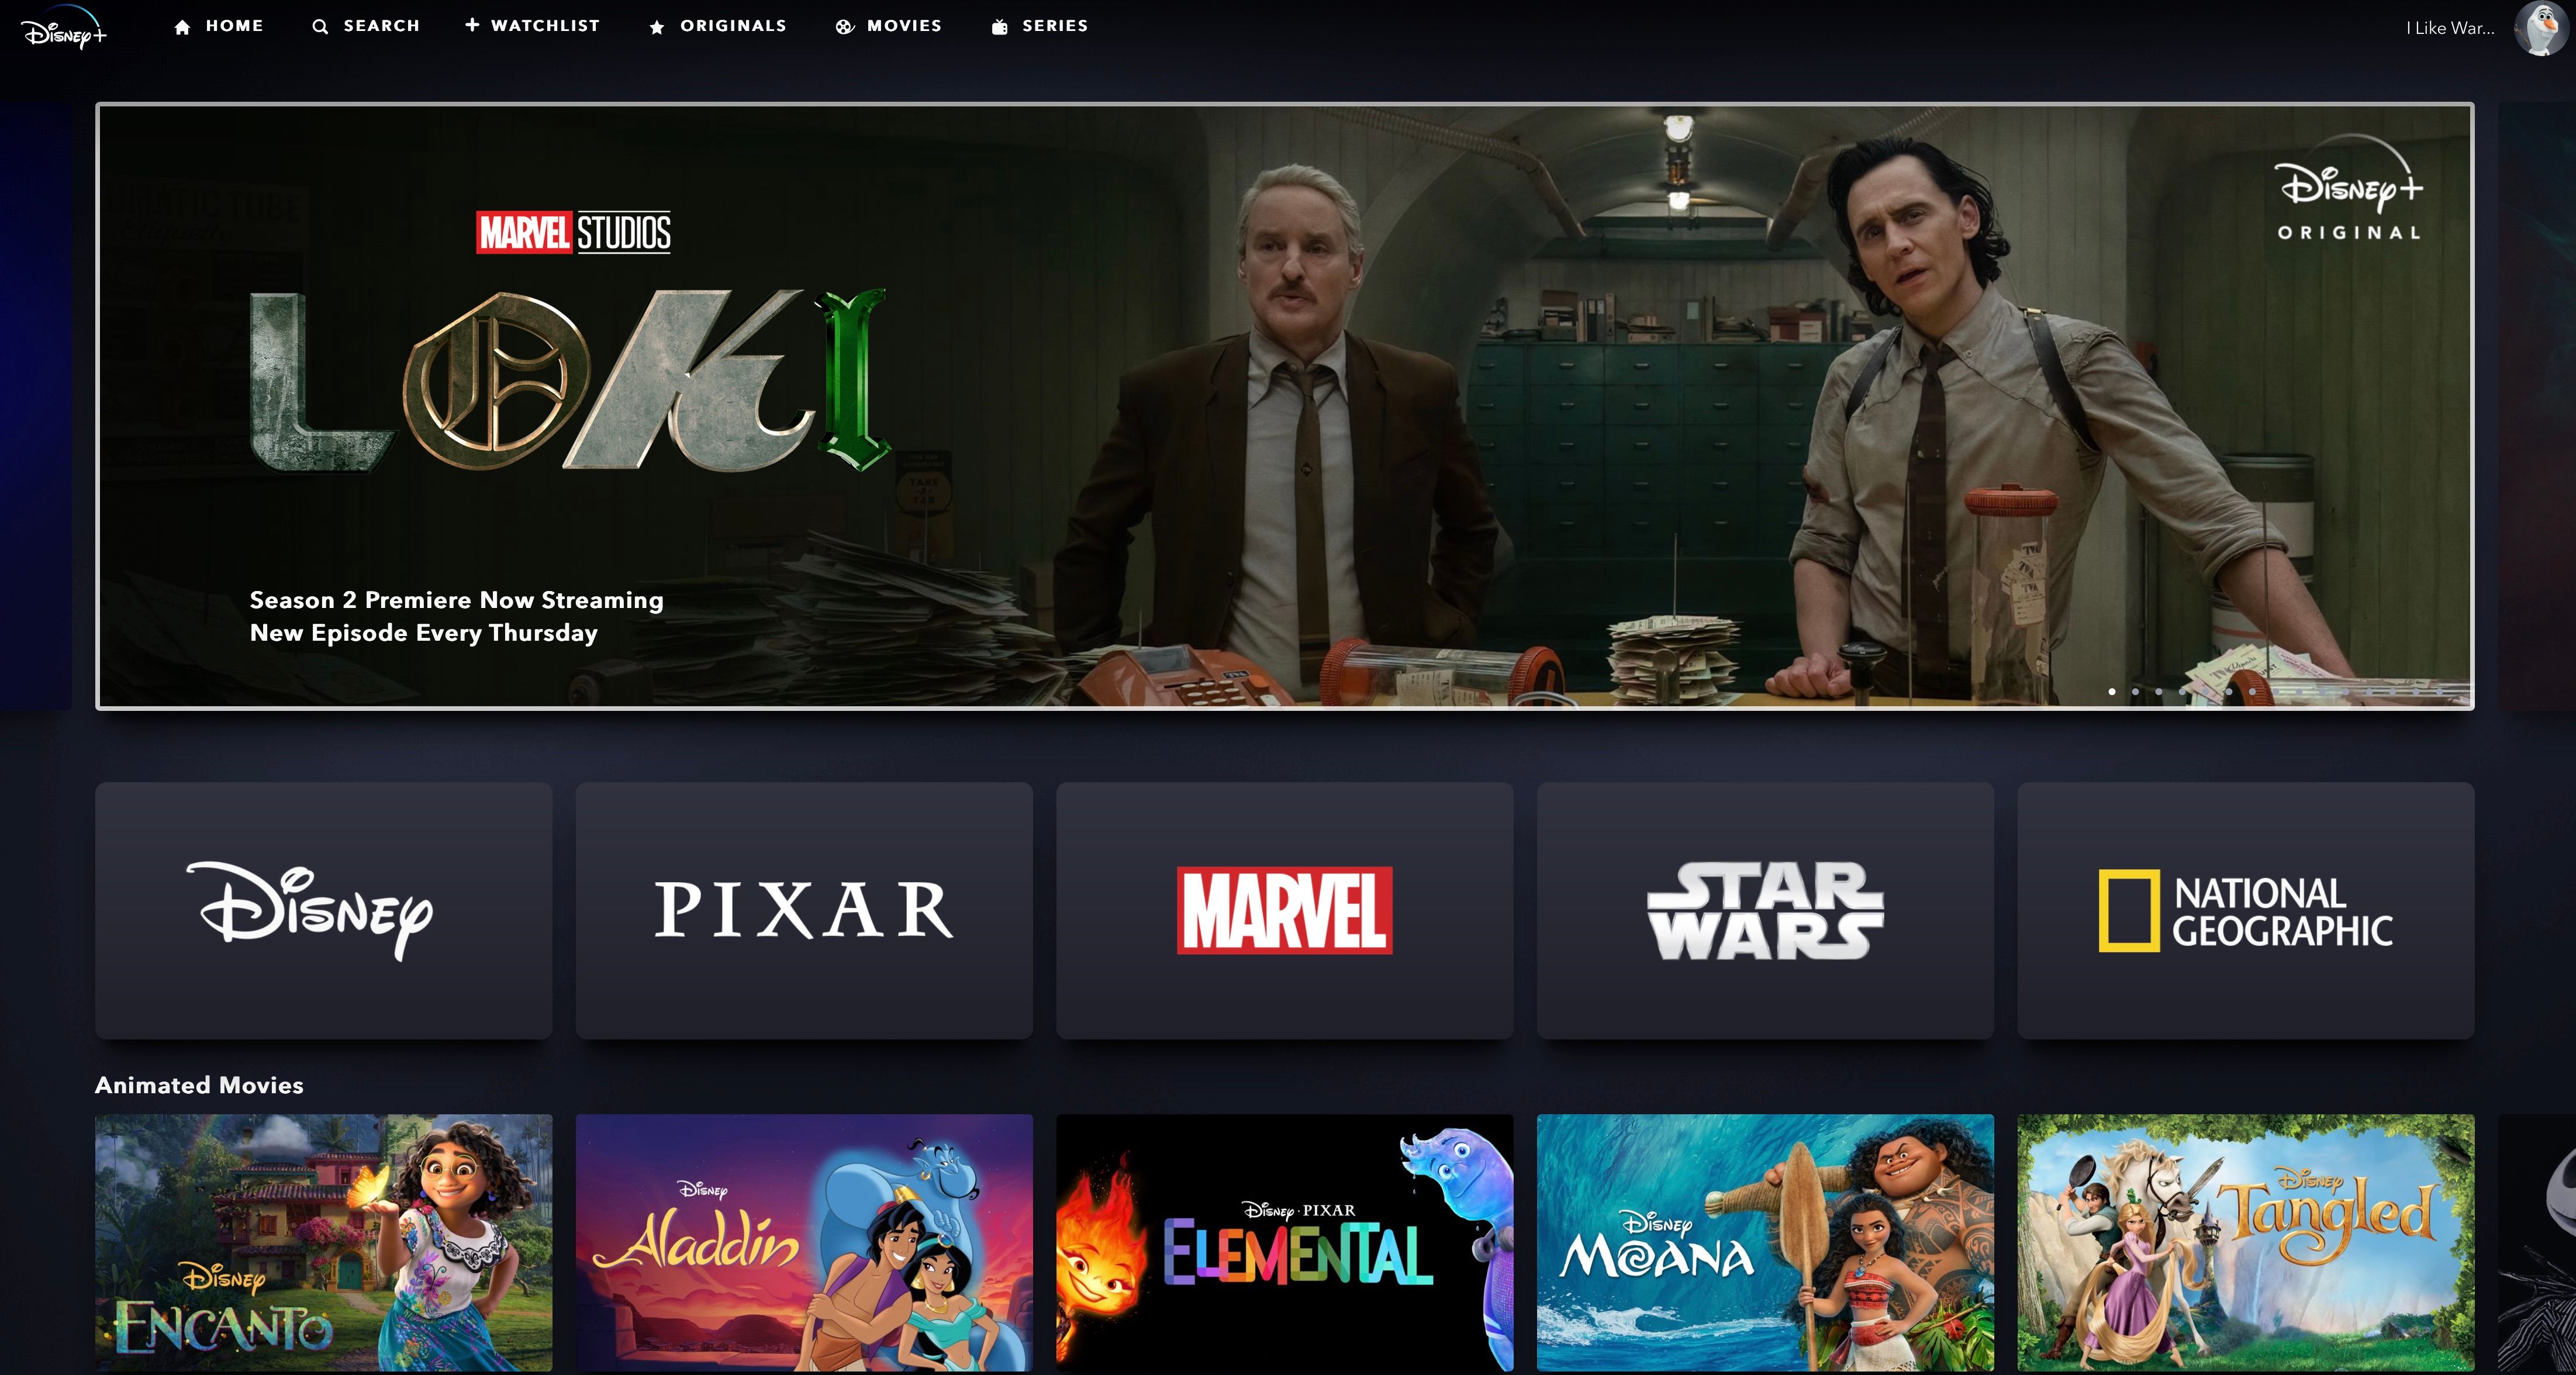 Disney+ Loki Home Page with list of animated movies